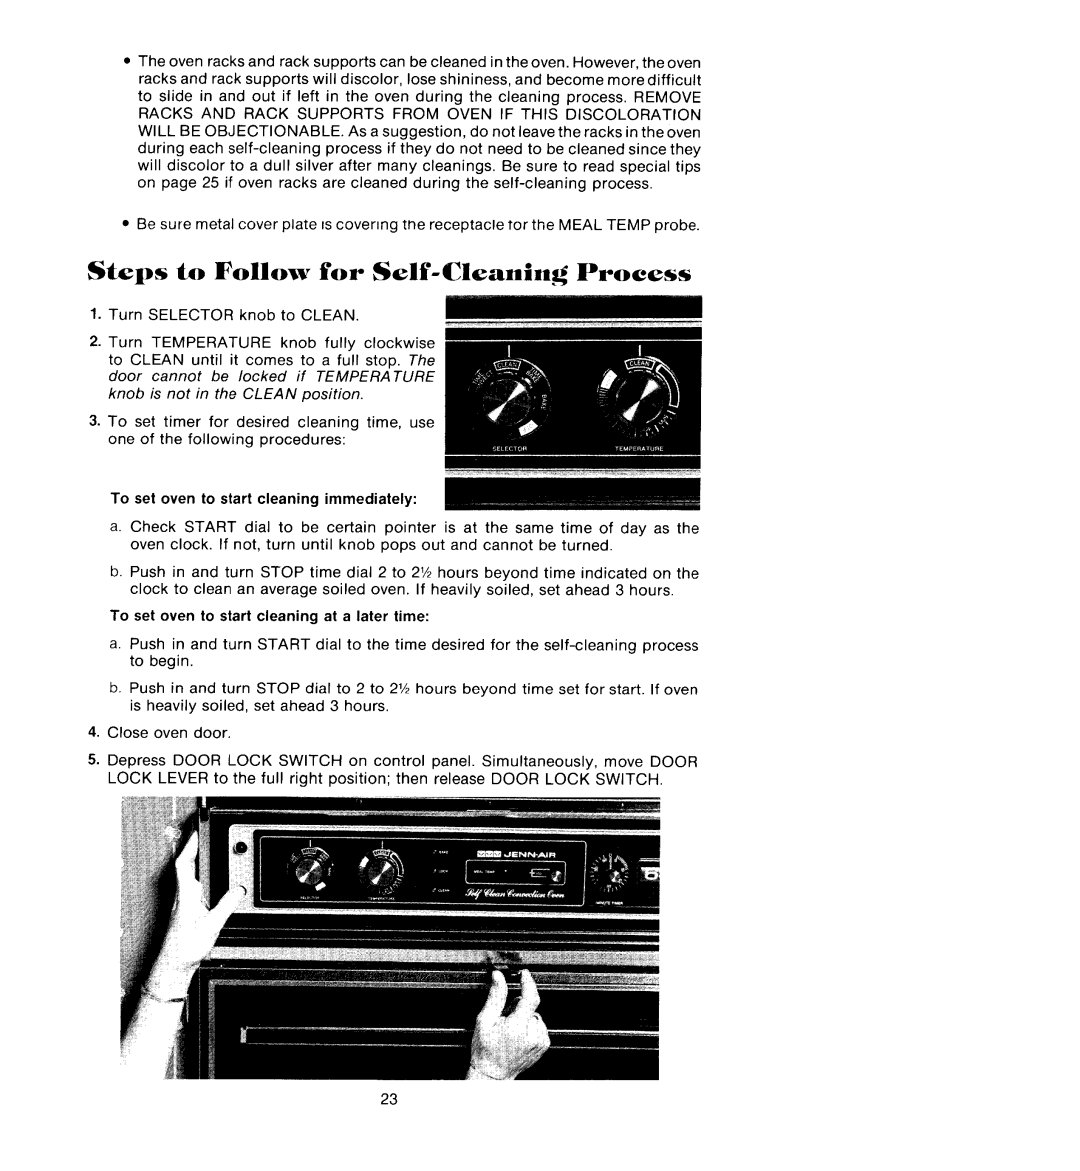 Jenn-Air W122, W225 manual Steps to Follow for Self-CleaningProcess, To set oven to start cleaning immediately 